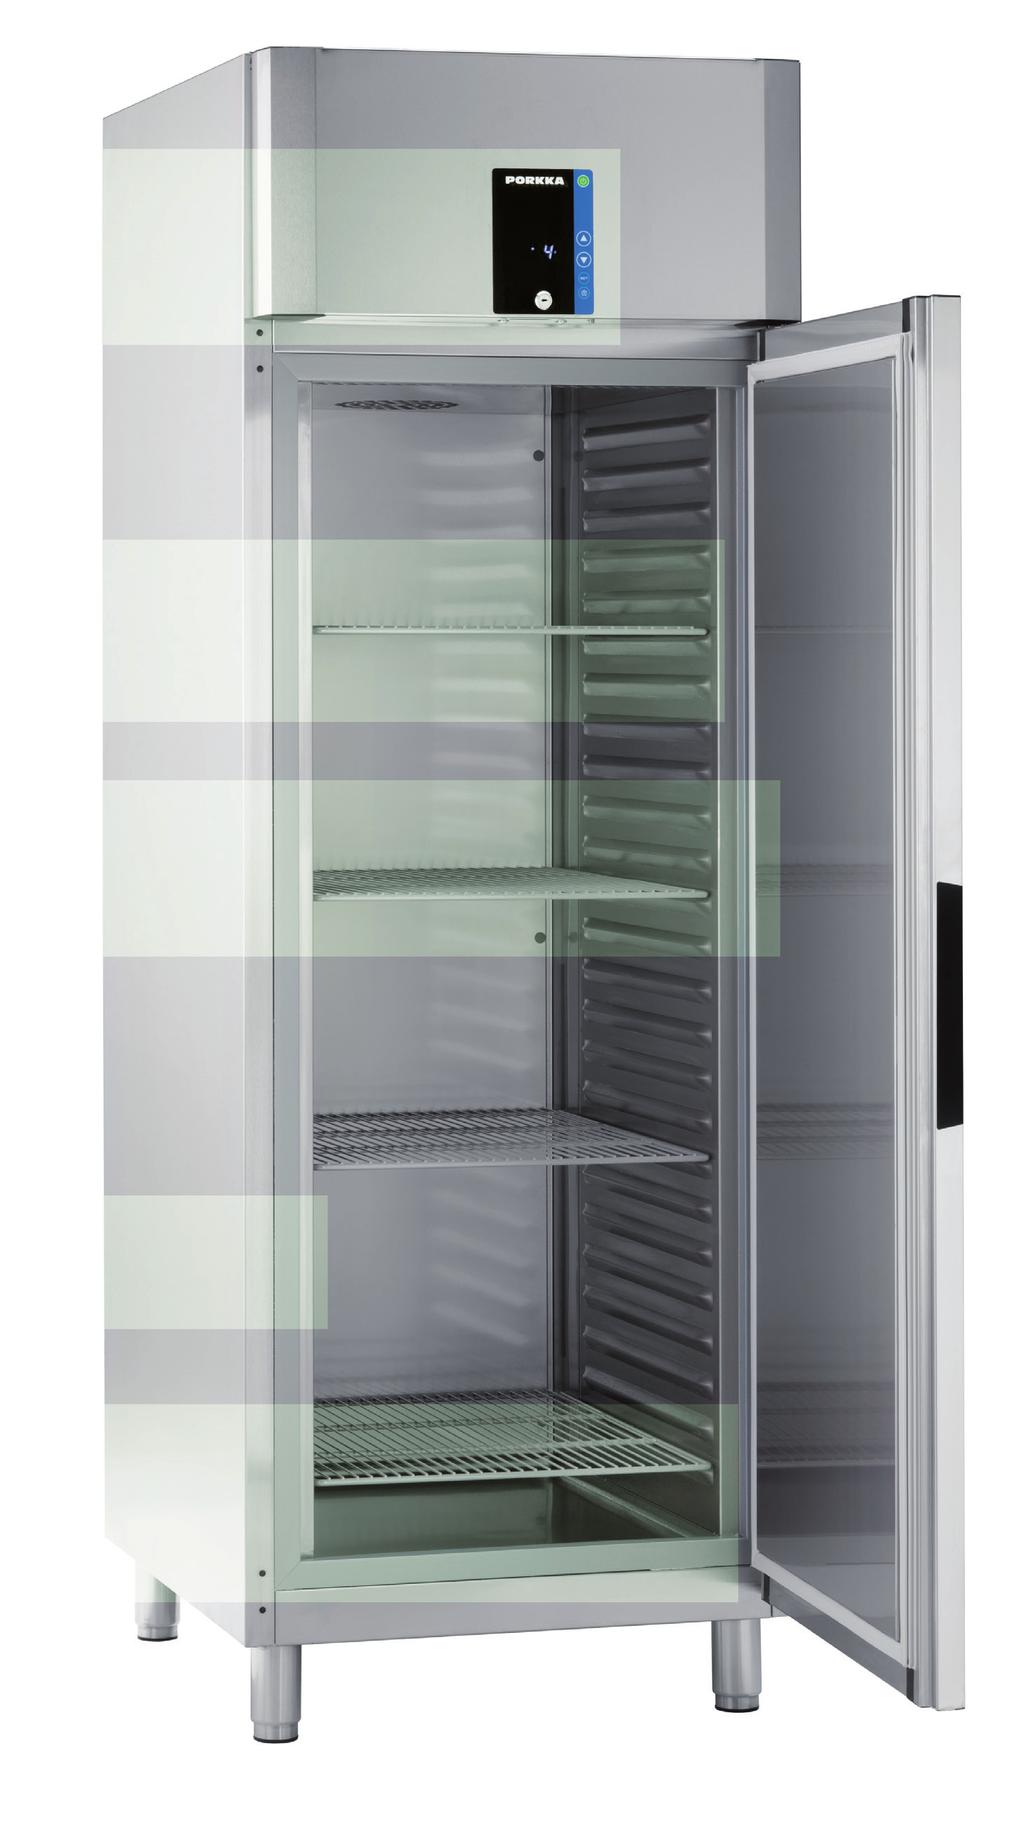 Professional cabinets Inventus professional refrigerators and freezers Large easy to read digital display, with simple and easy to use with a built-in microprocessor controller.